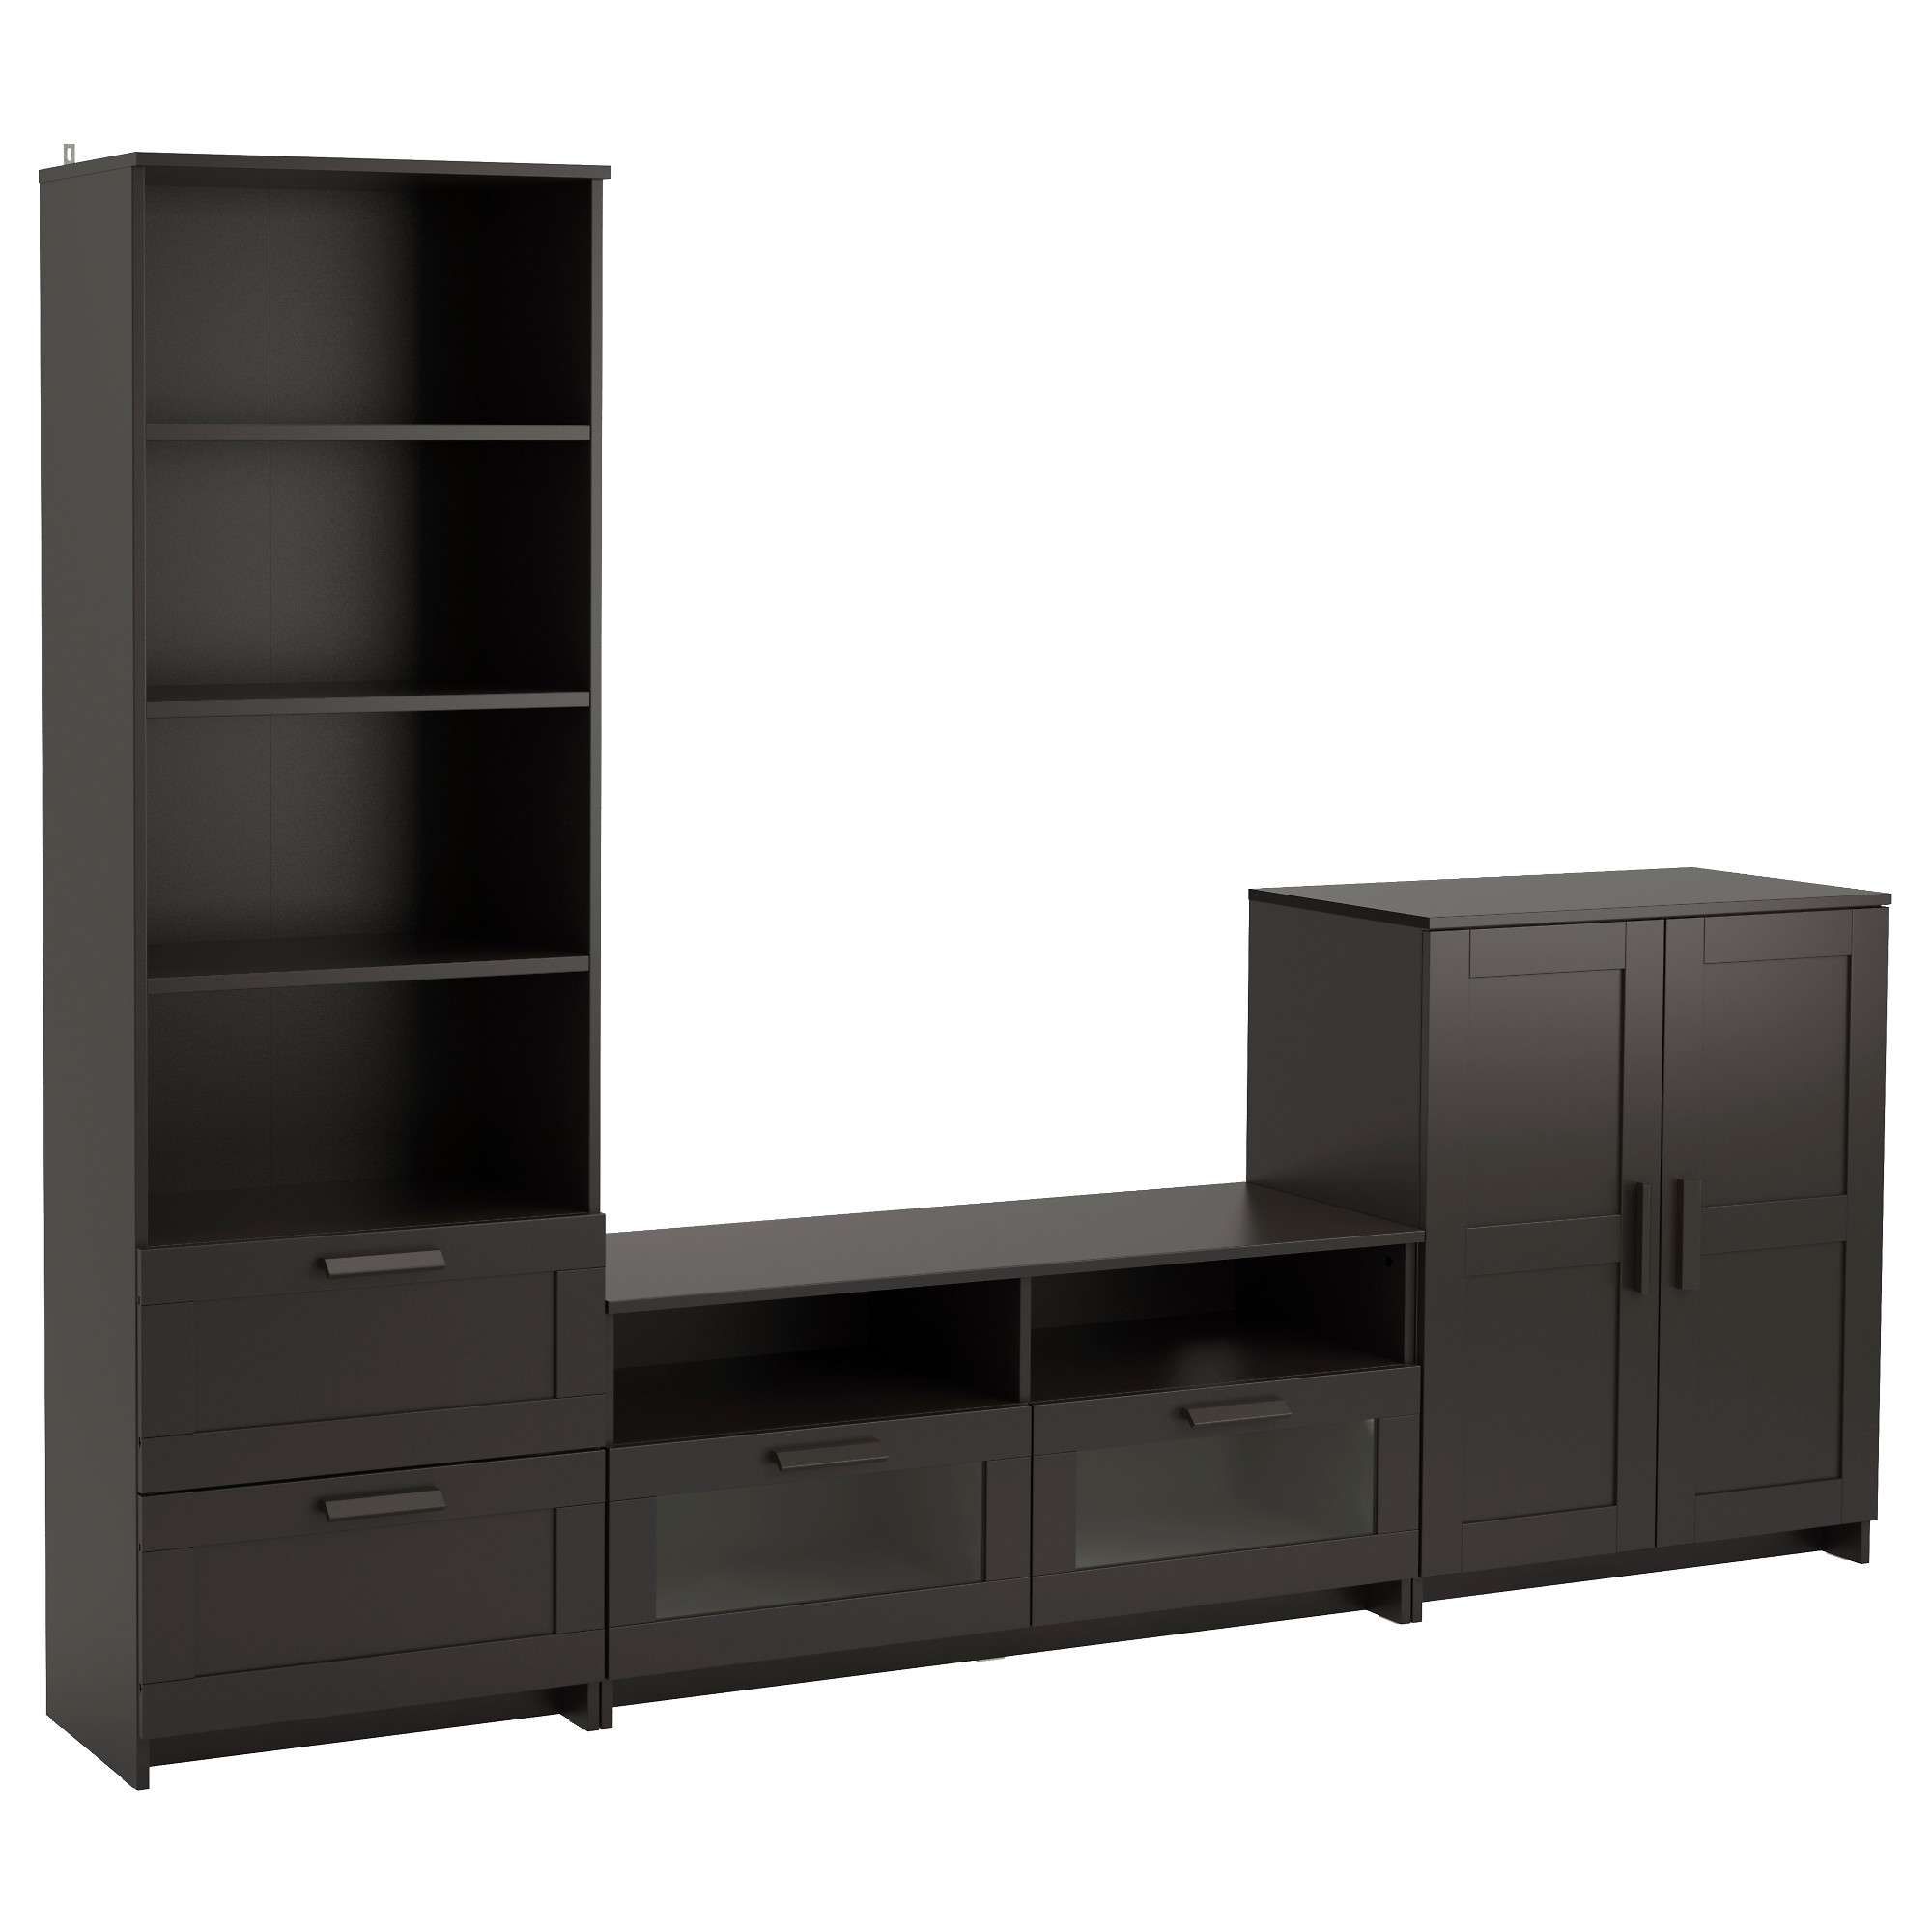 Brimnes Tv Storage Combination Black 260x41x190 Cm – Ikea Pertaining To Tv Stands With Drawers And Shelves (View 14 of 15)